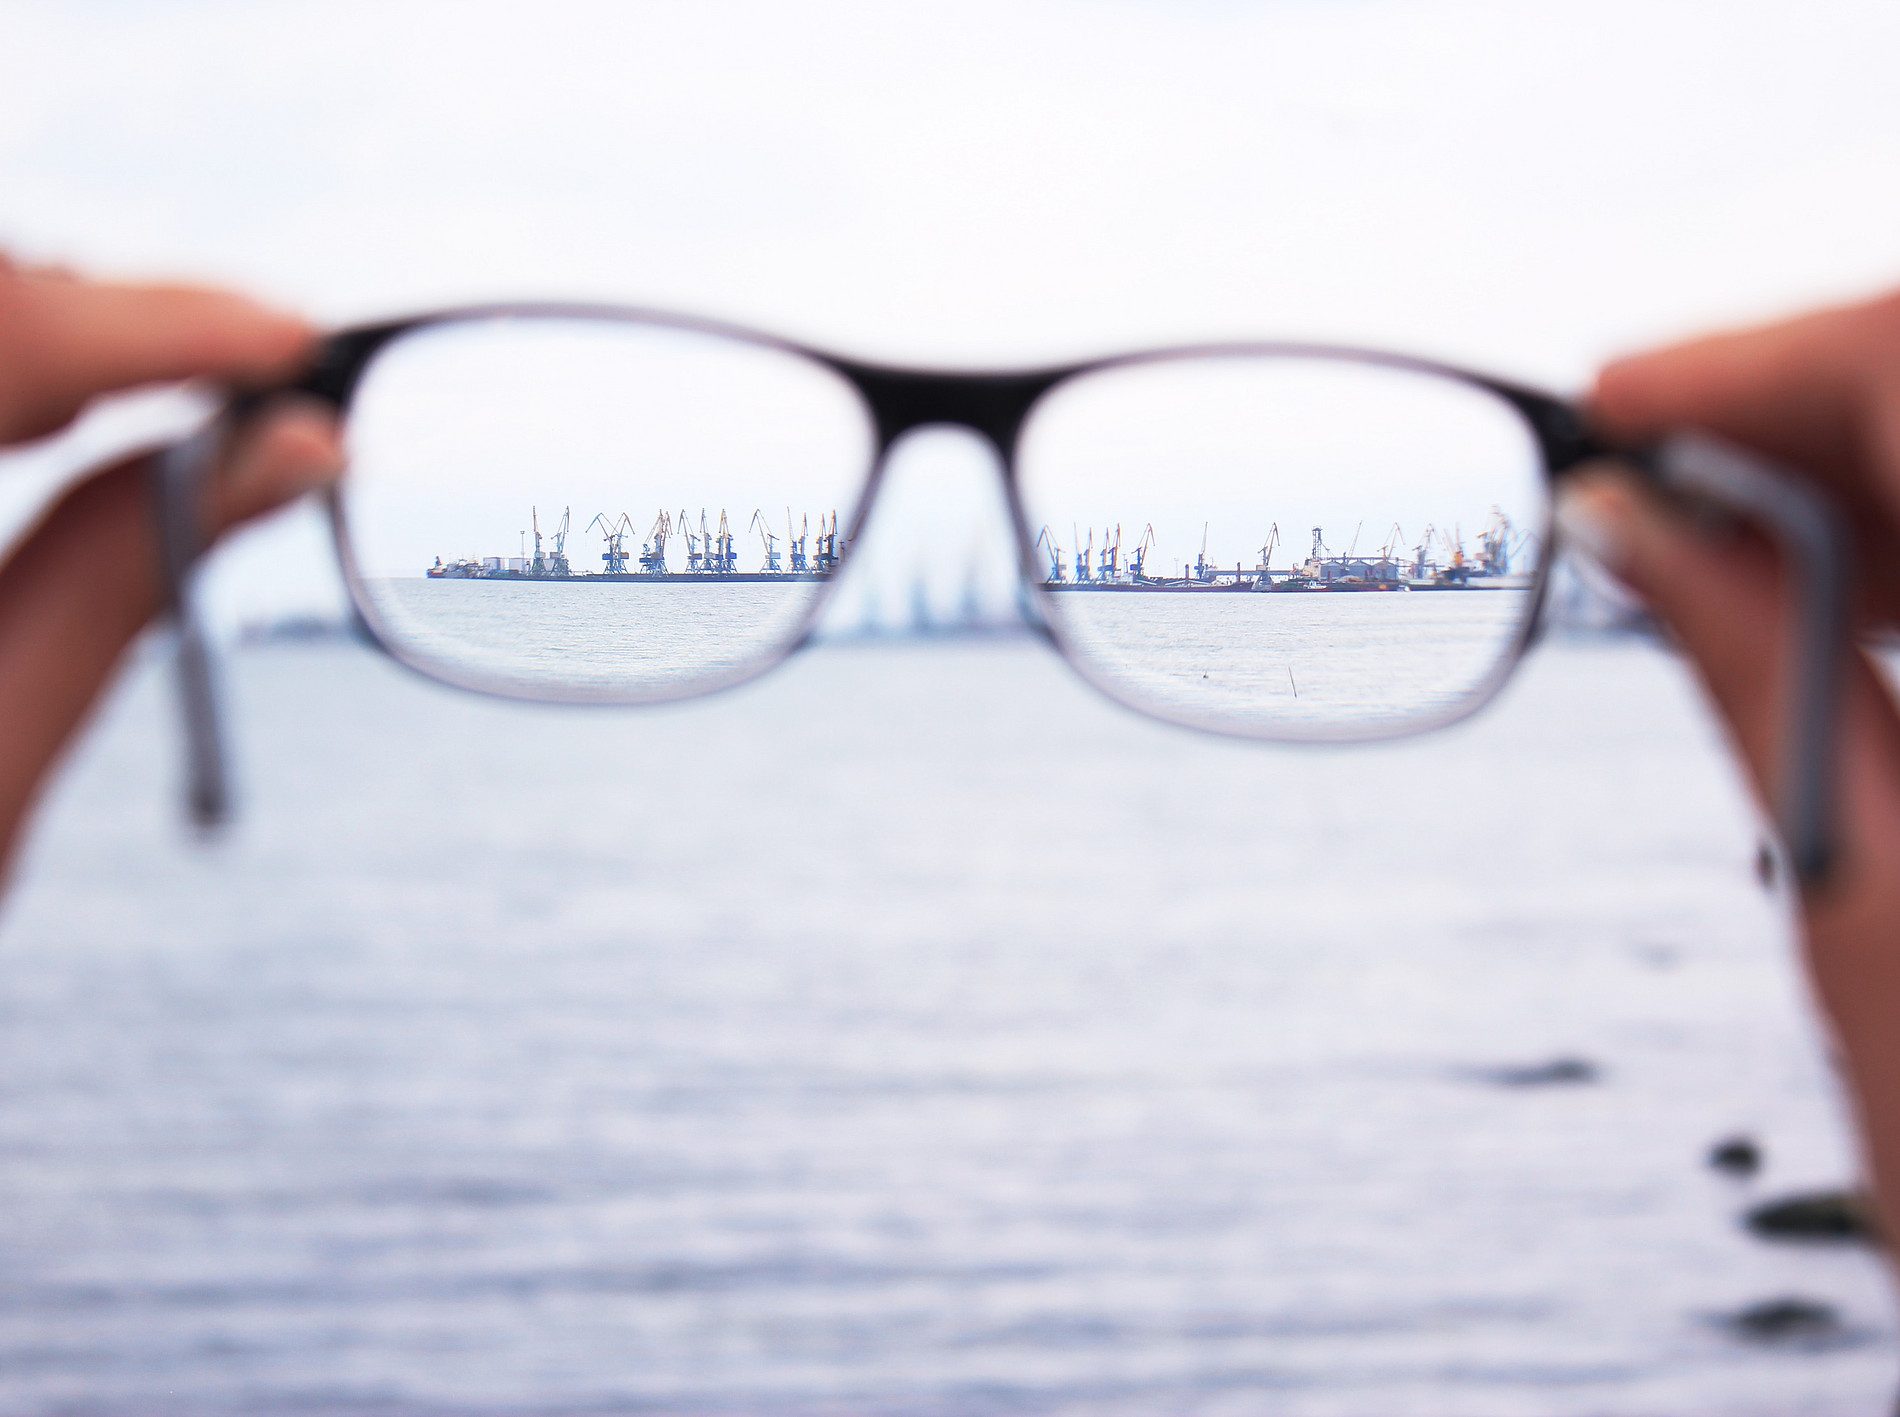 View through glasses of distant scenery. Everything outside the lenses is blurred, details inside the lenses are recognizable. ©Lena Taranenko auf Unsplash